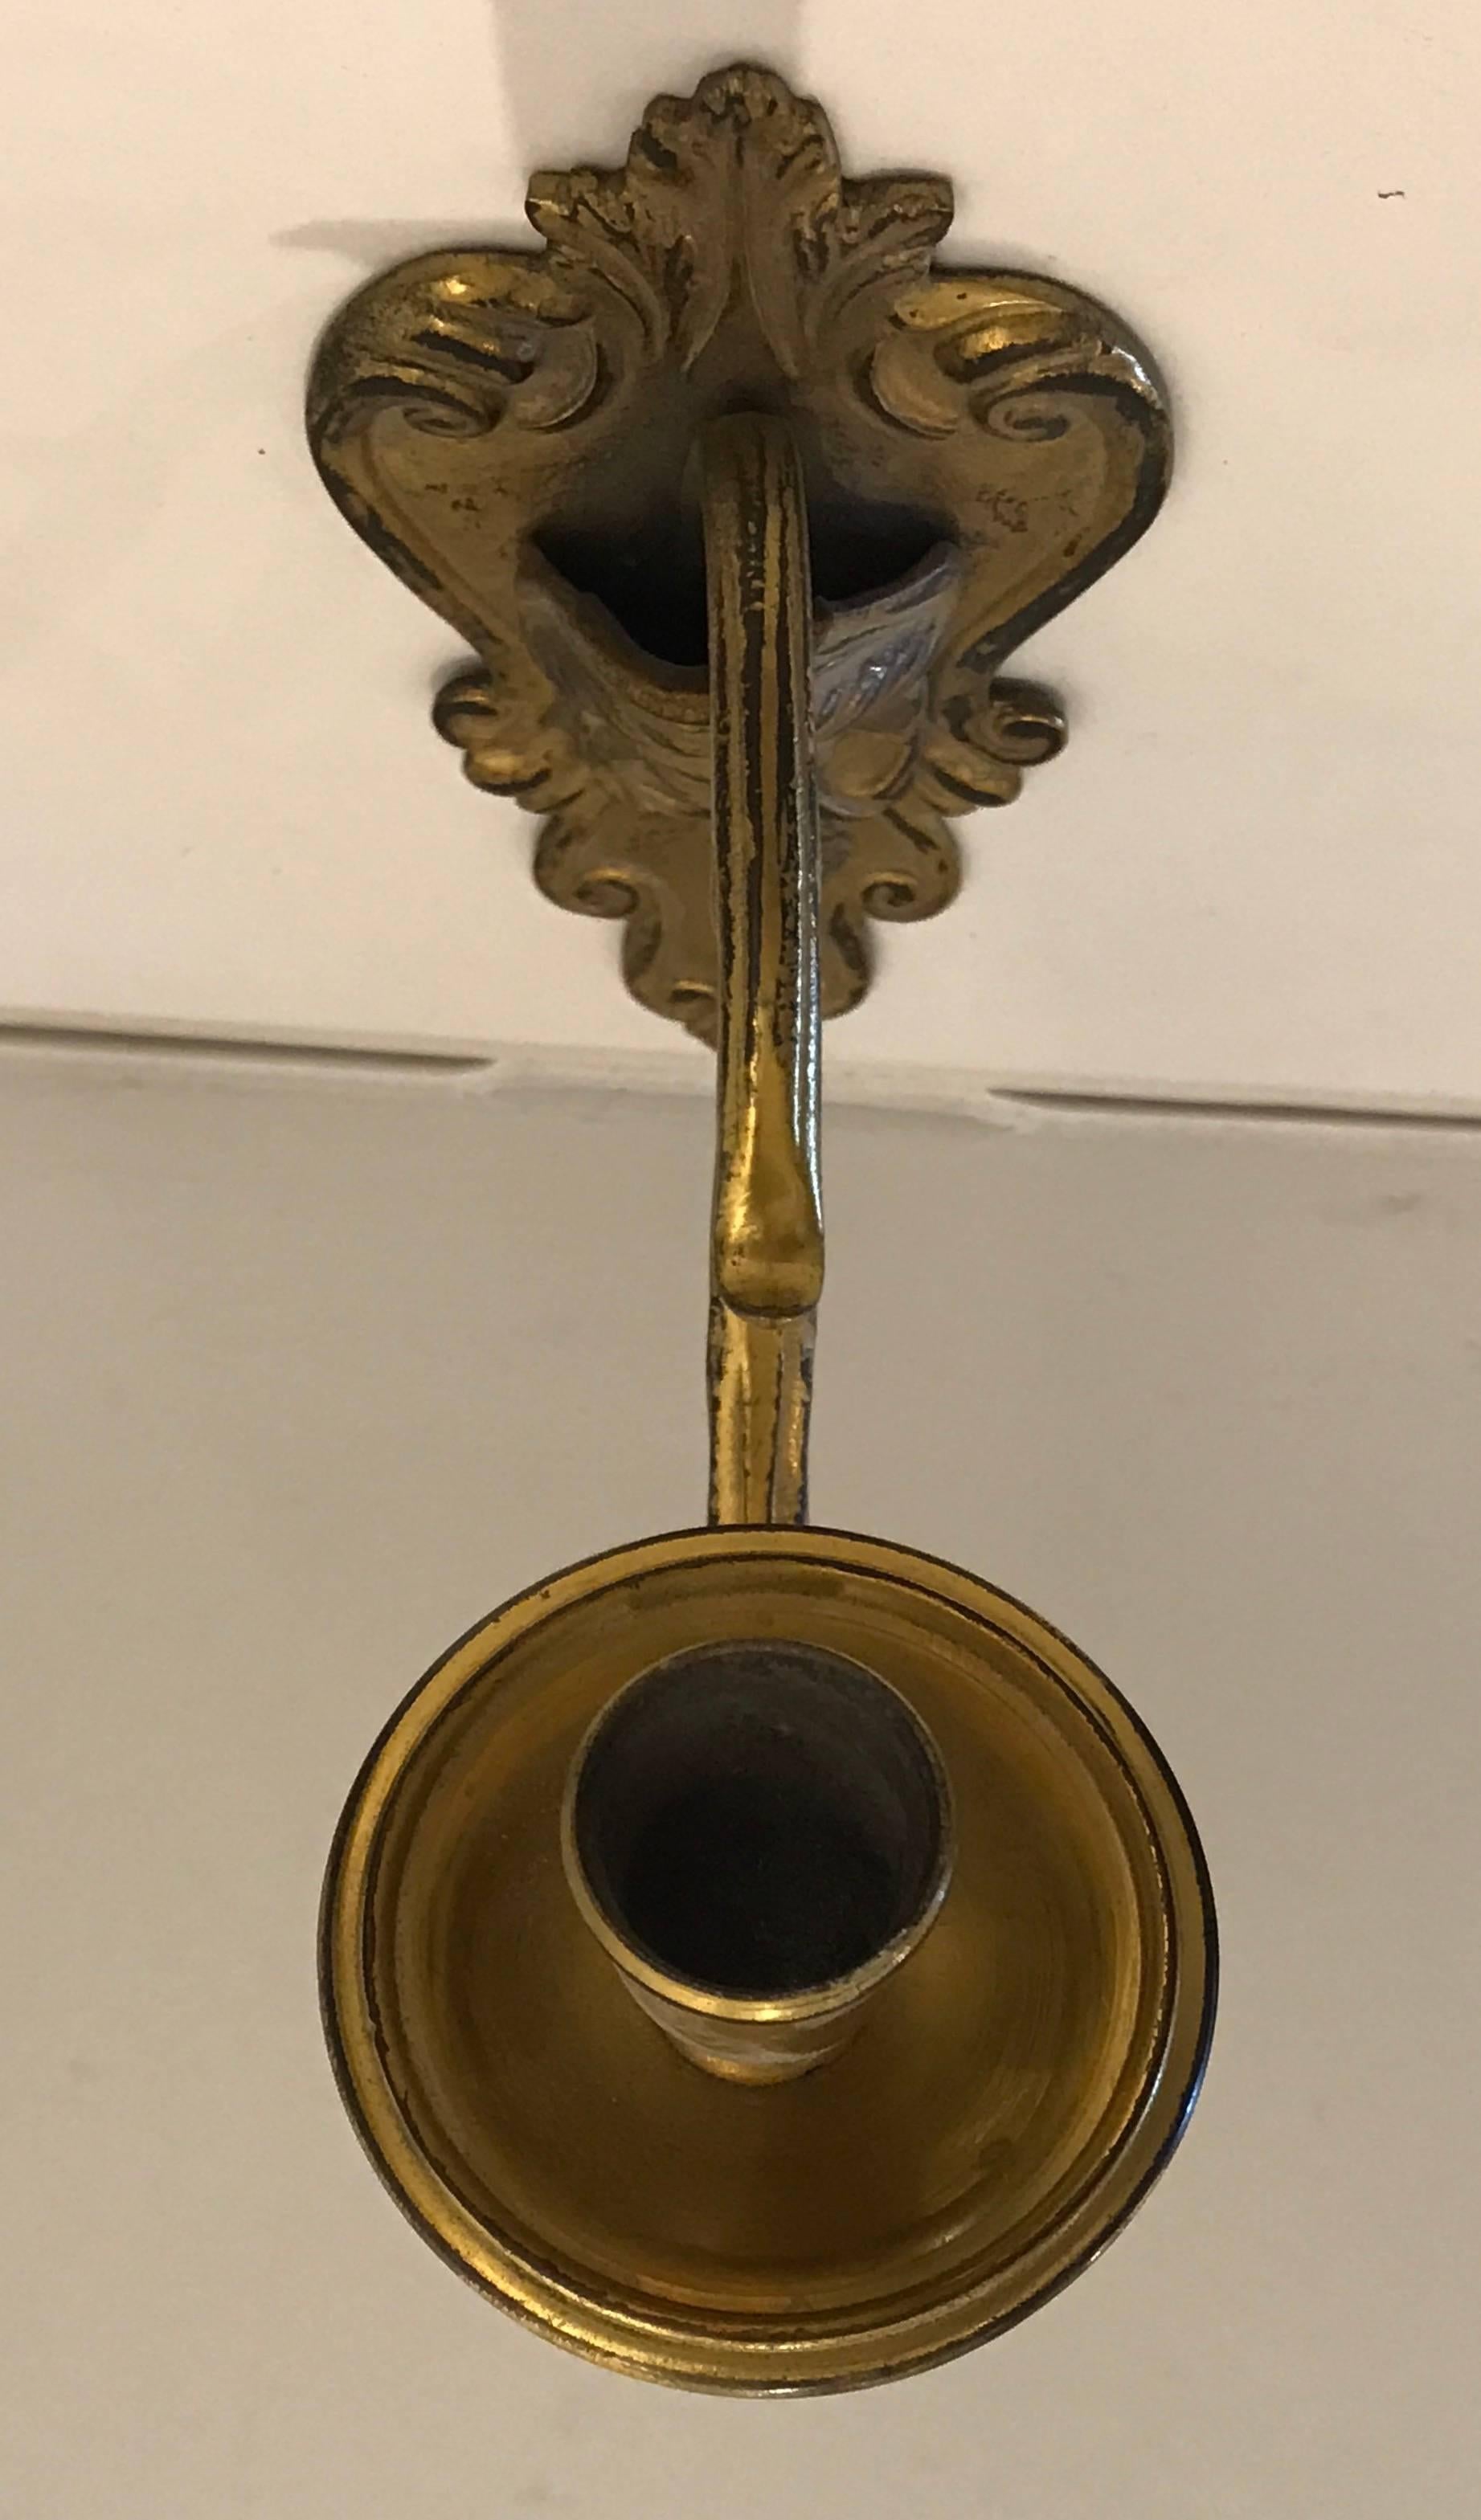 19th century gilt bronze candle sconce with face detail.